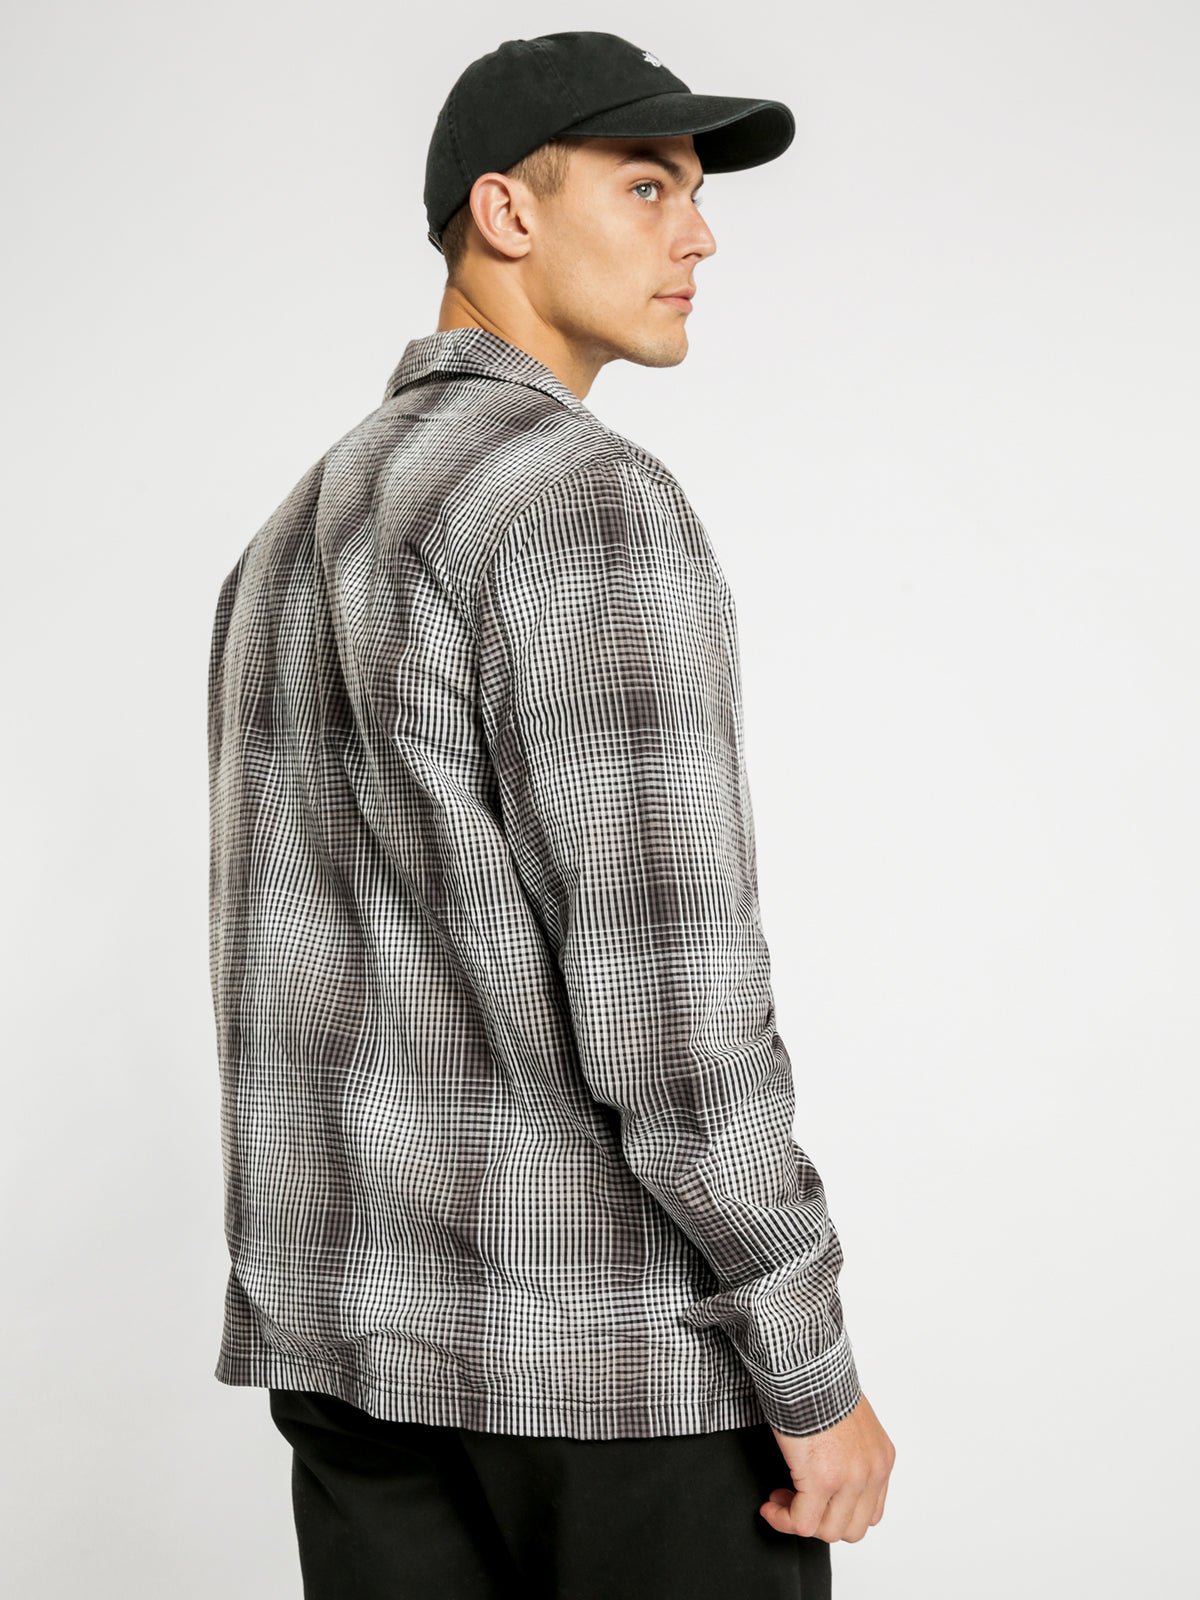 Neat Check Zip Up Long Sleeve Shirt in Black